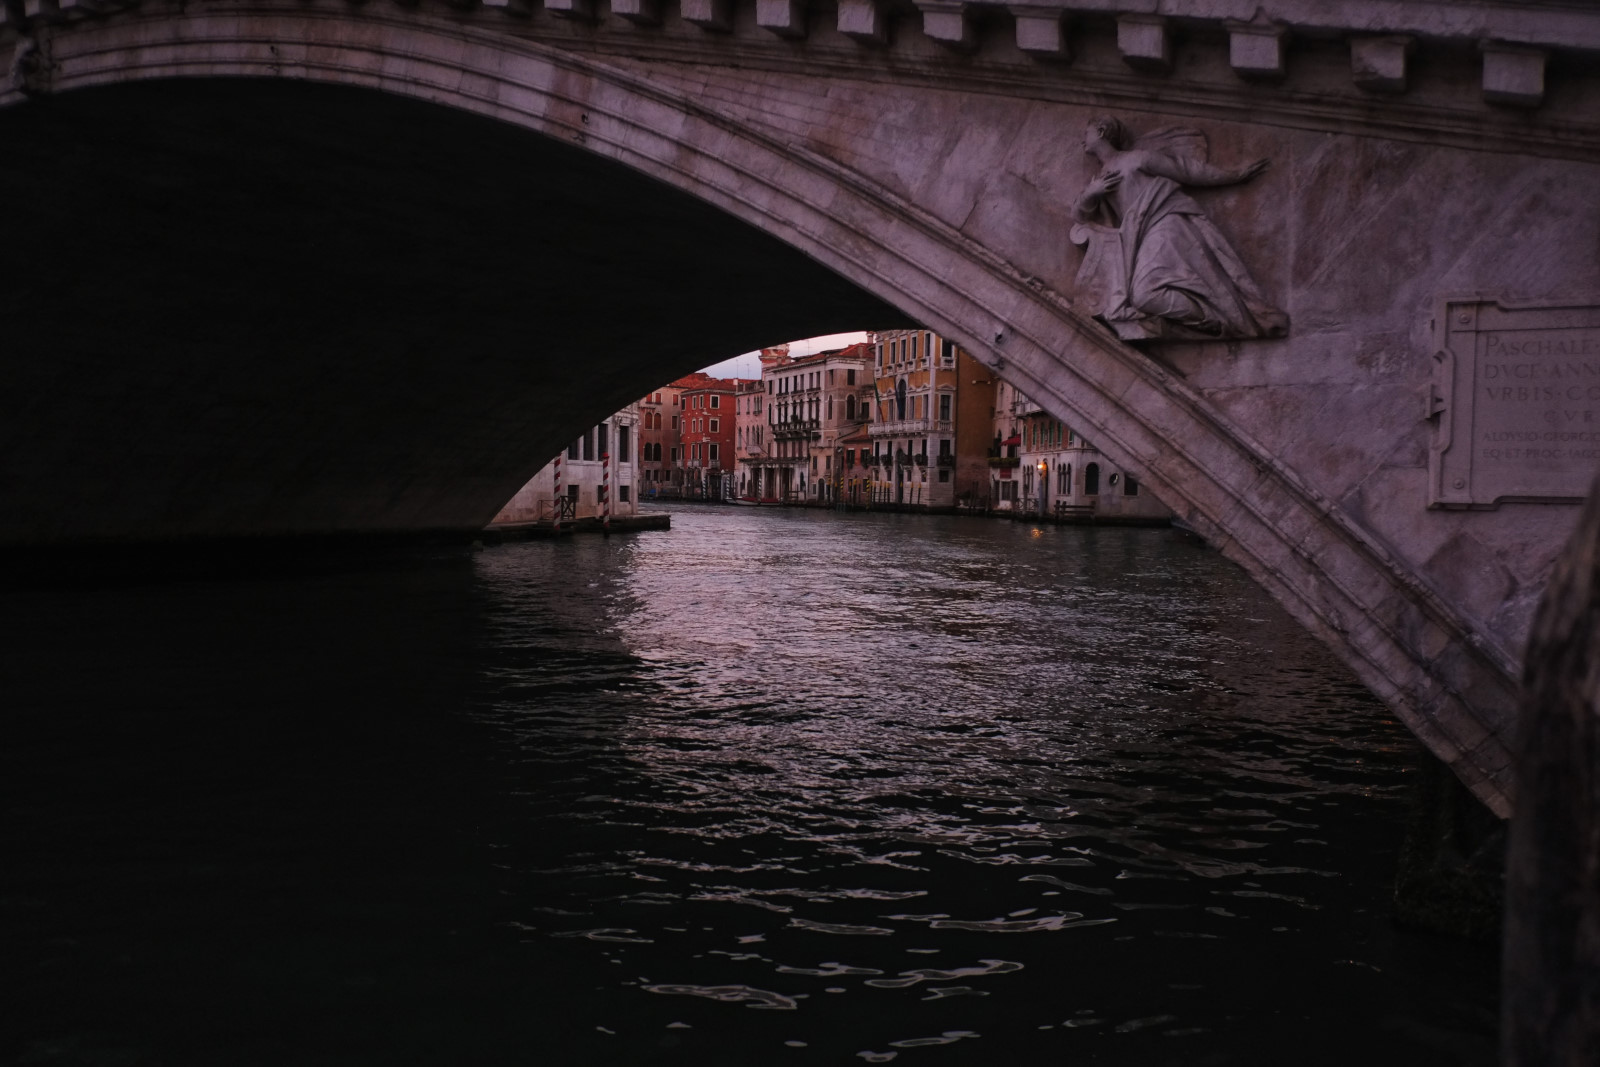 Grand Canal from under the arch of the Rialto Bridge at dawn.